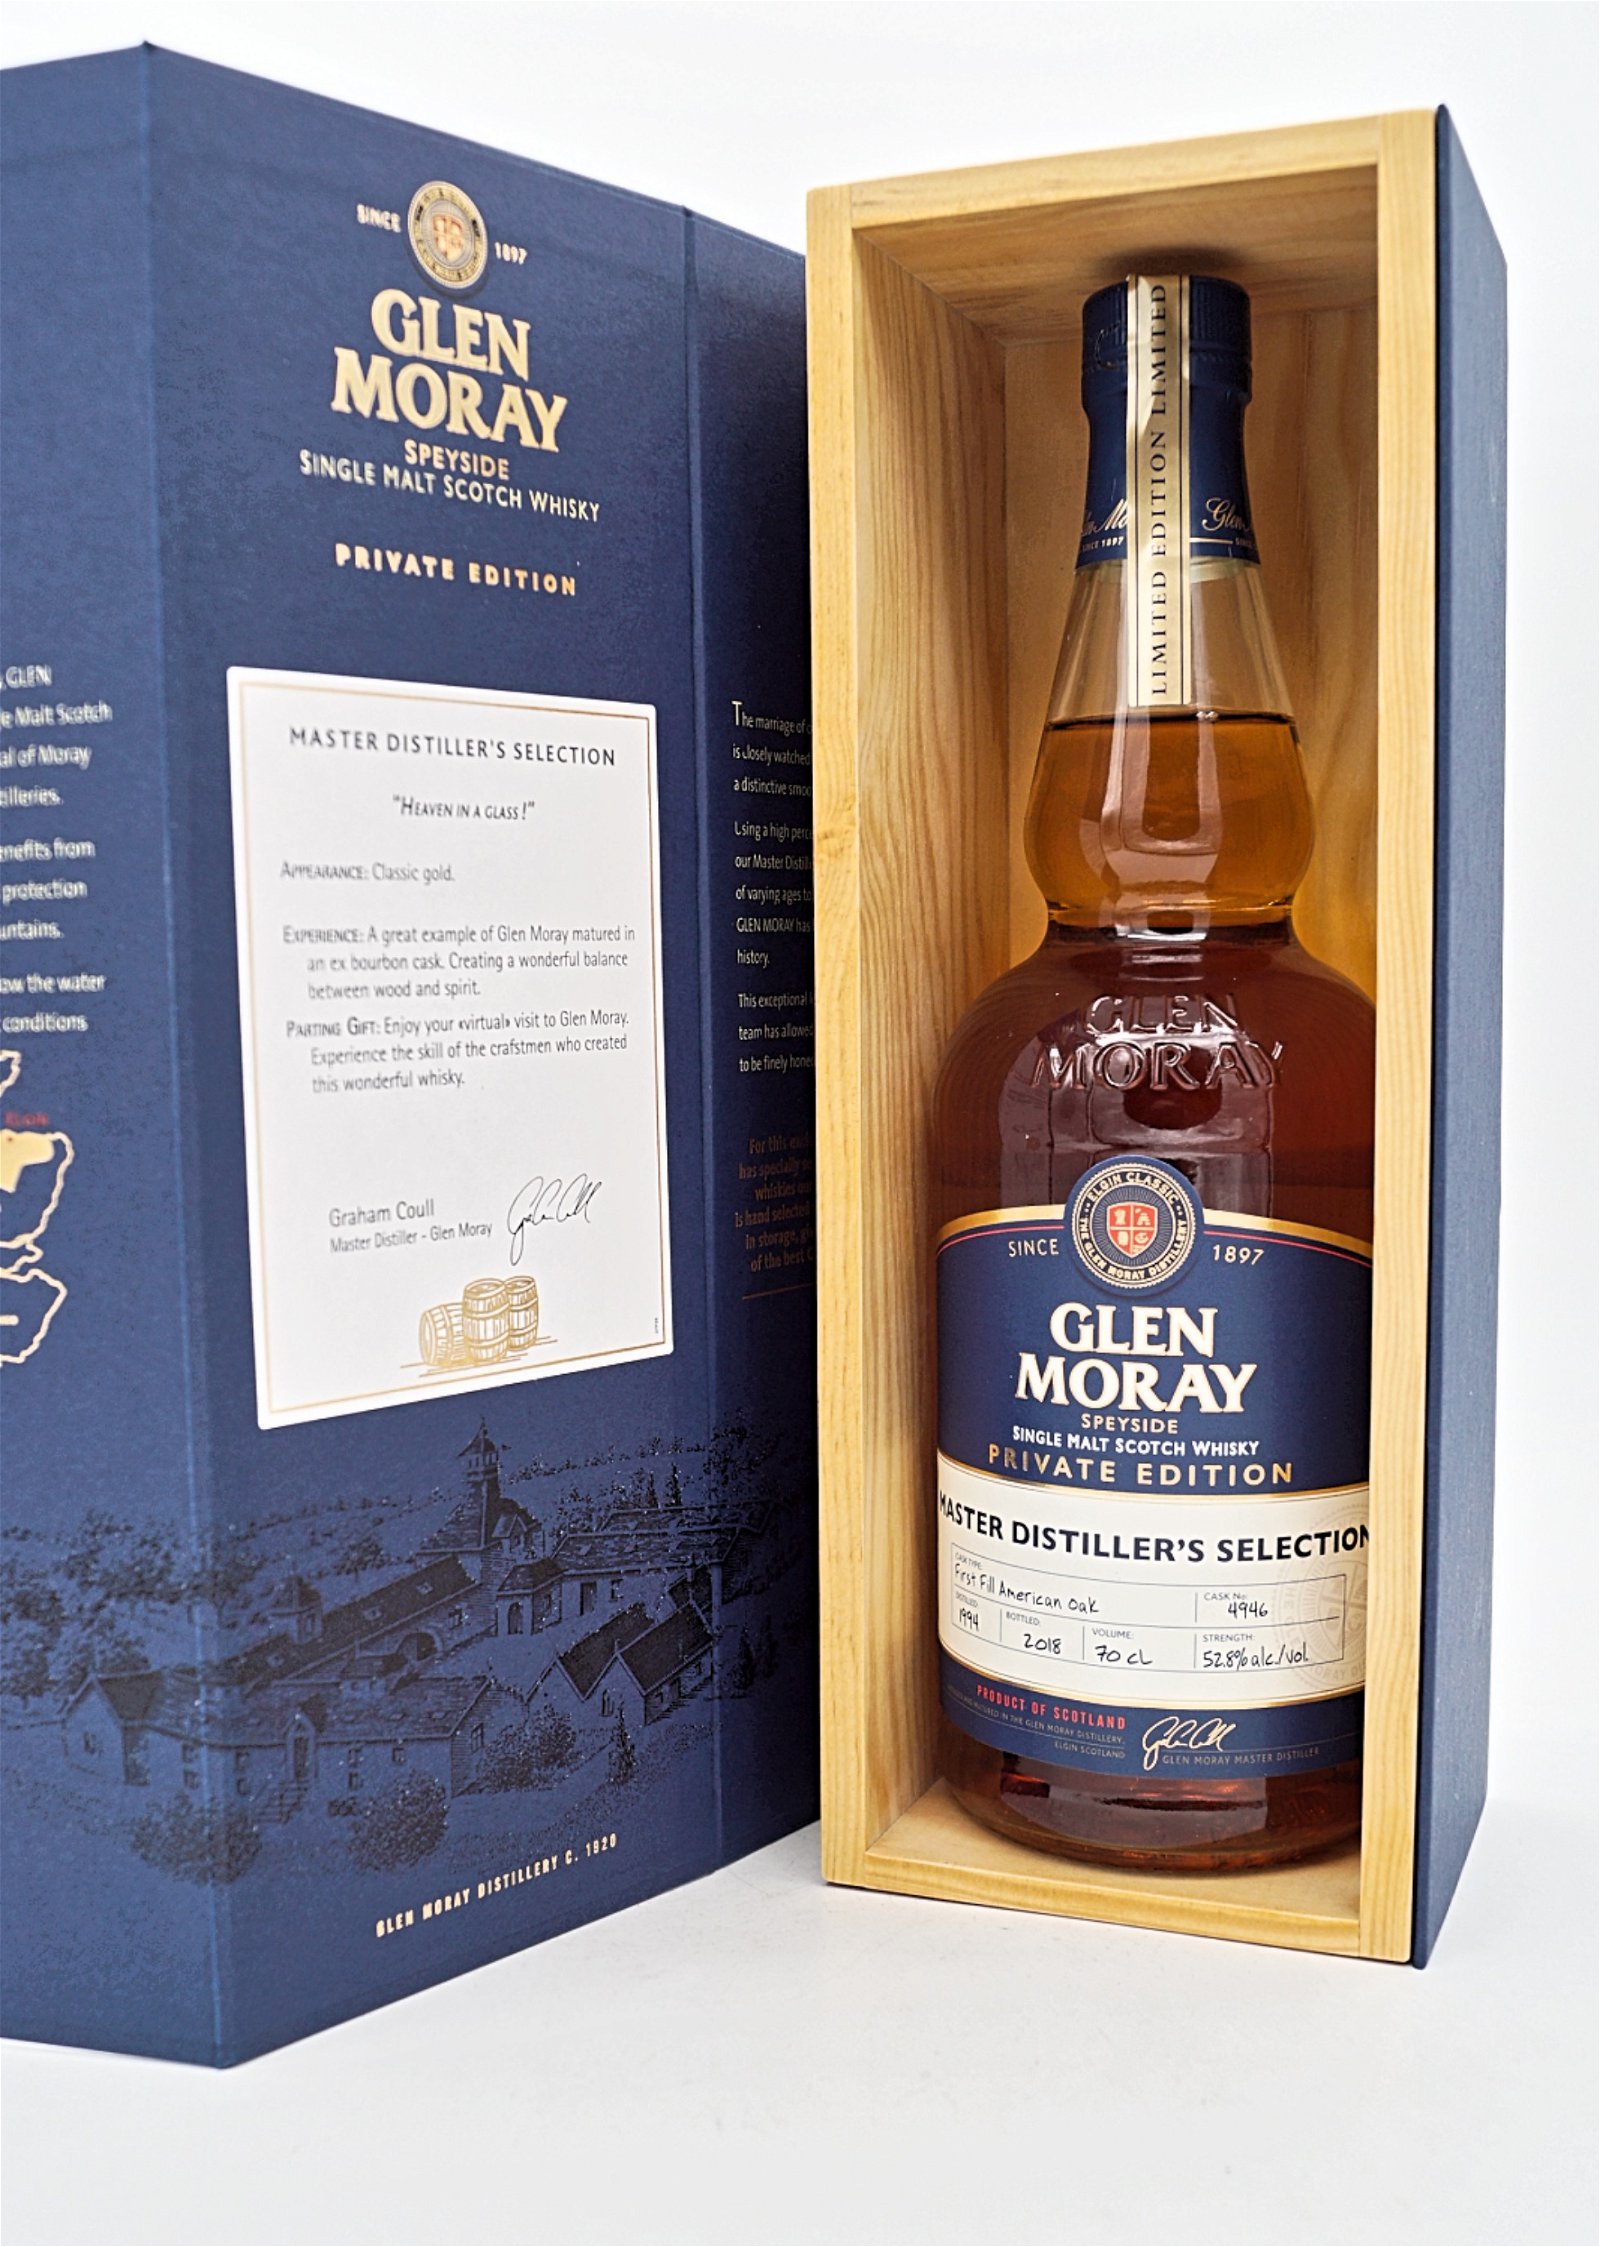 Glen Moray Private Edition 1994 First Fill American Oak #4946 Master Distillers Selection